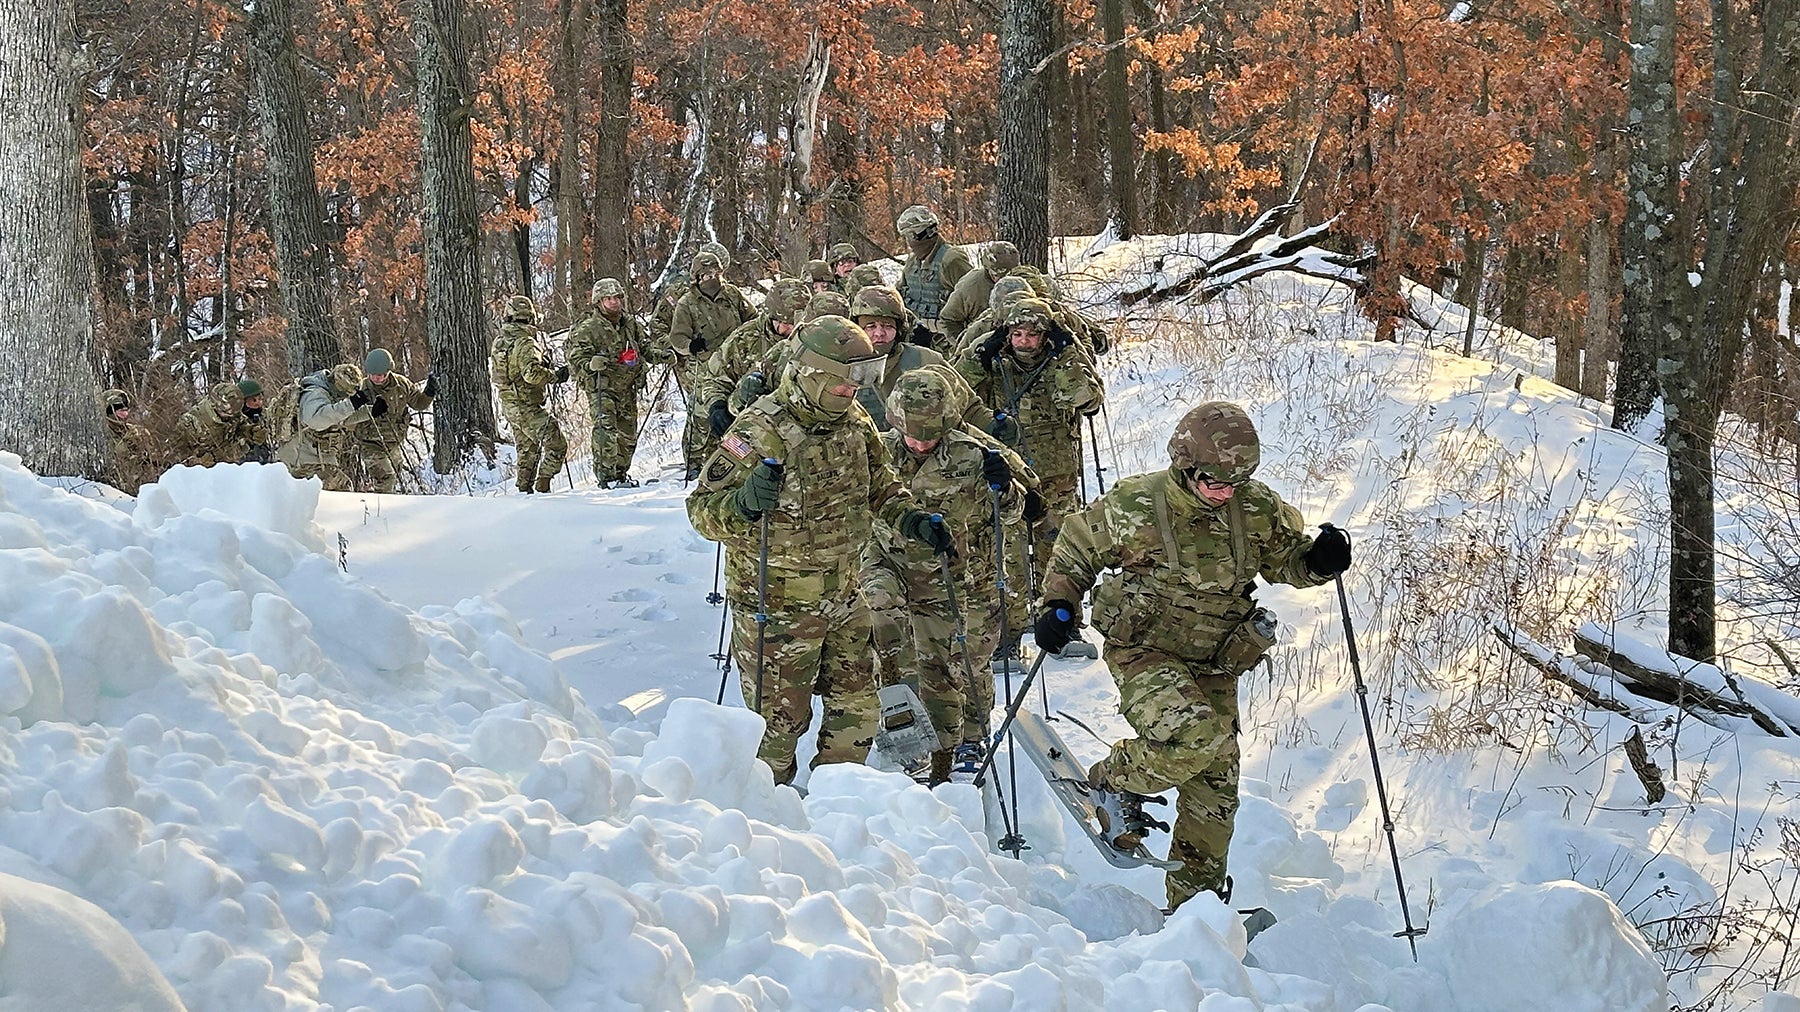 Soldiers from the U.S. Army Reserve’s 88th Readiness Division train on snowshoes at Fort McCoy, Wisconsin. (Credit: U.S. Army Reserve/Christopher Hanson)